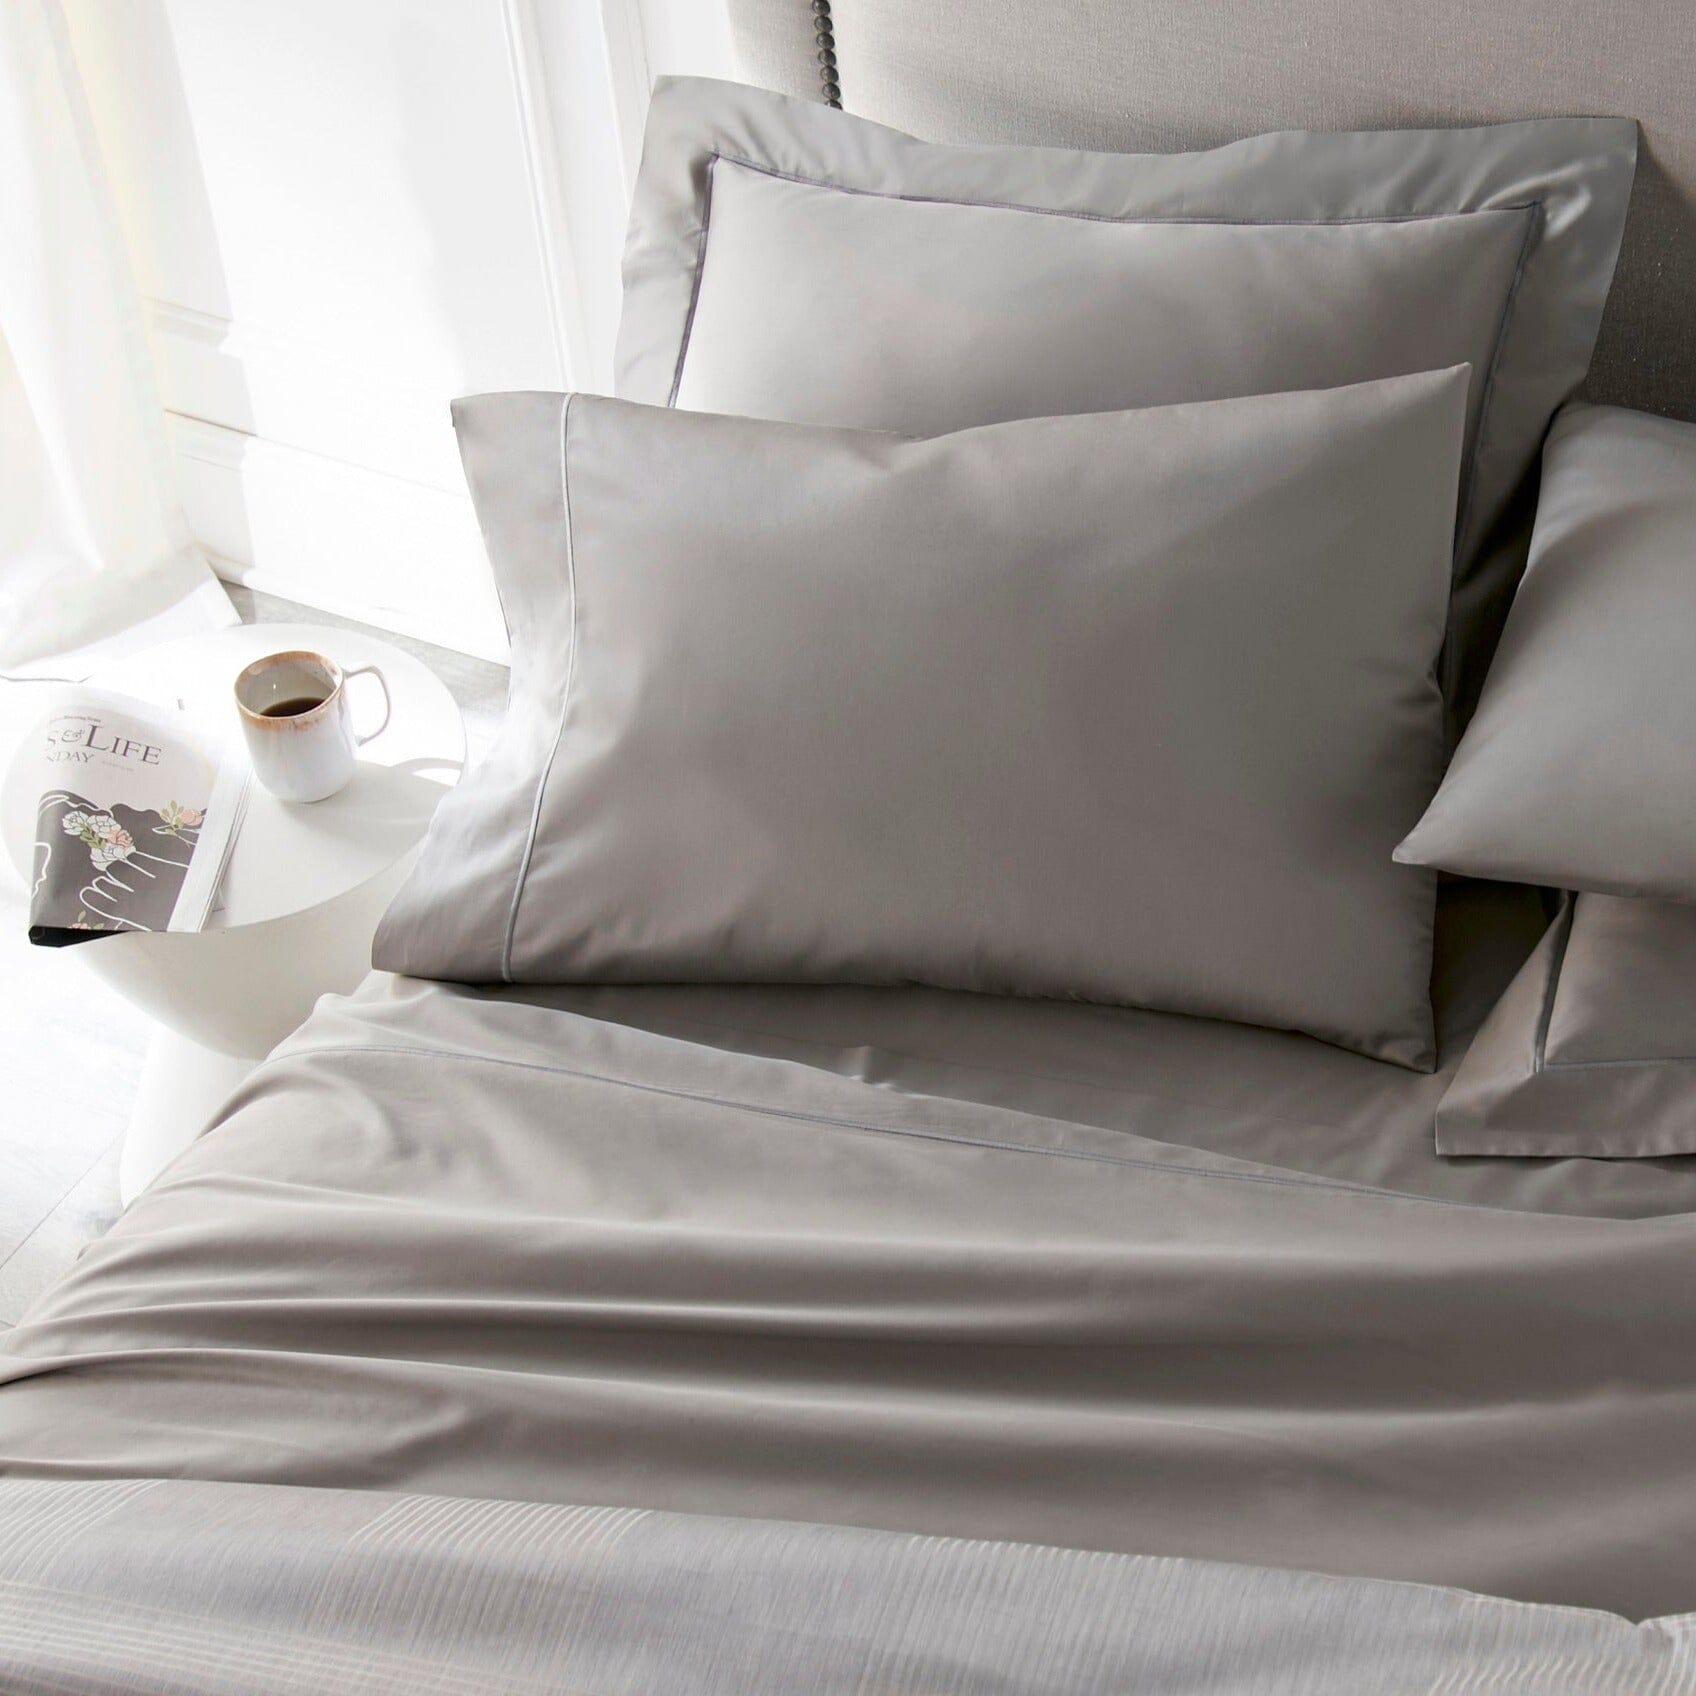 Duvet Cover - Soprano Pewter Bedding - Peacock Alley Soprano Sateen at Fig Linens and Home